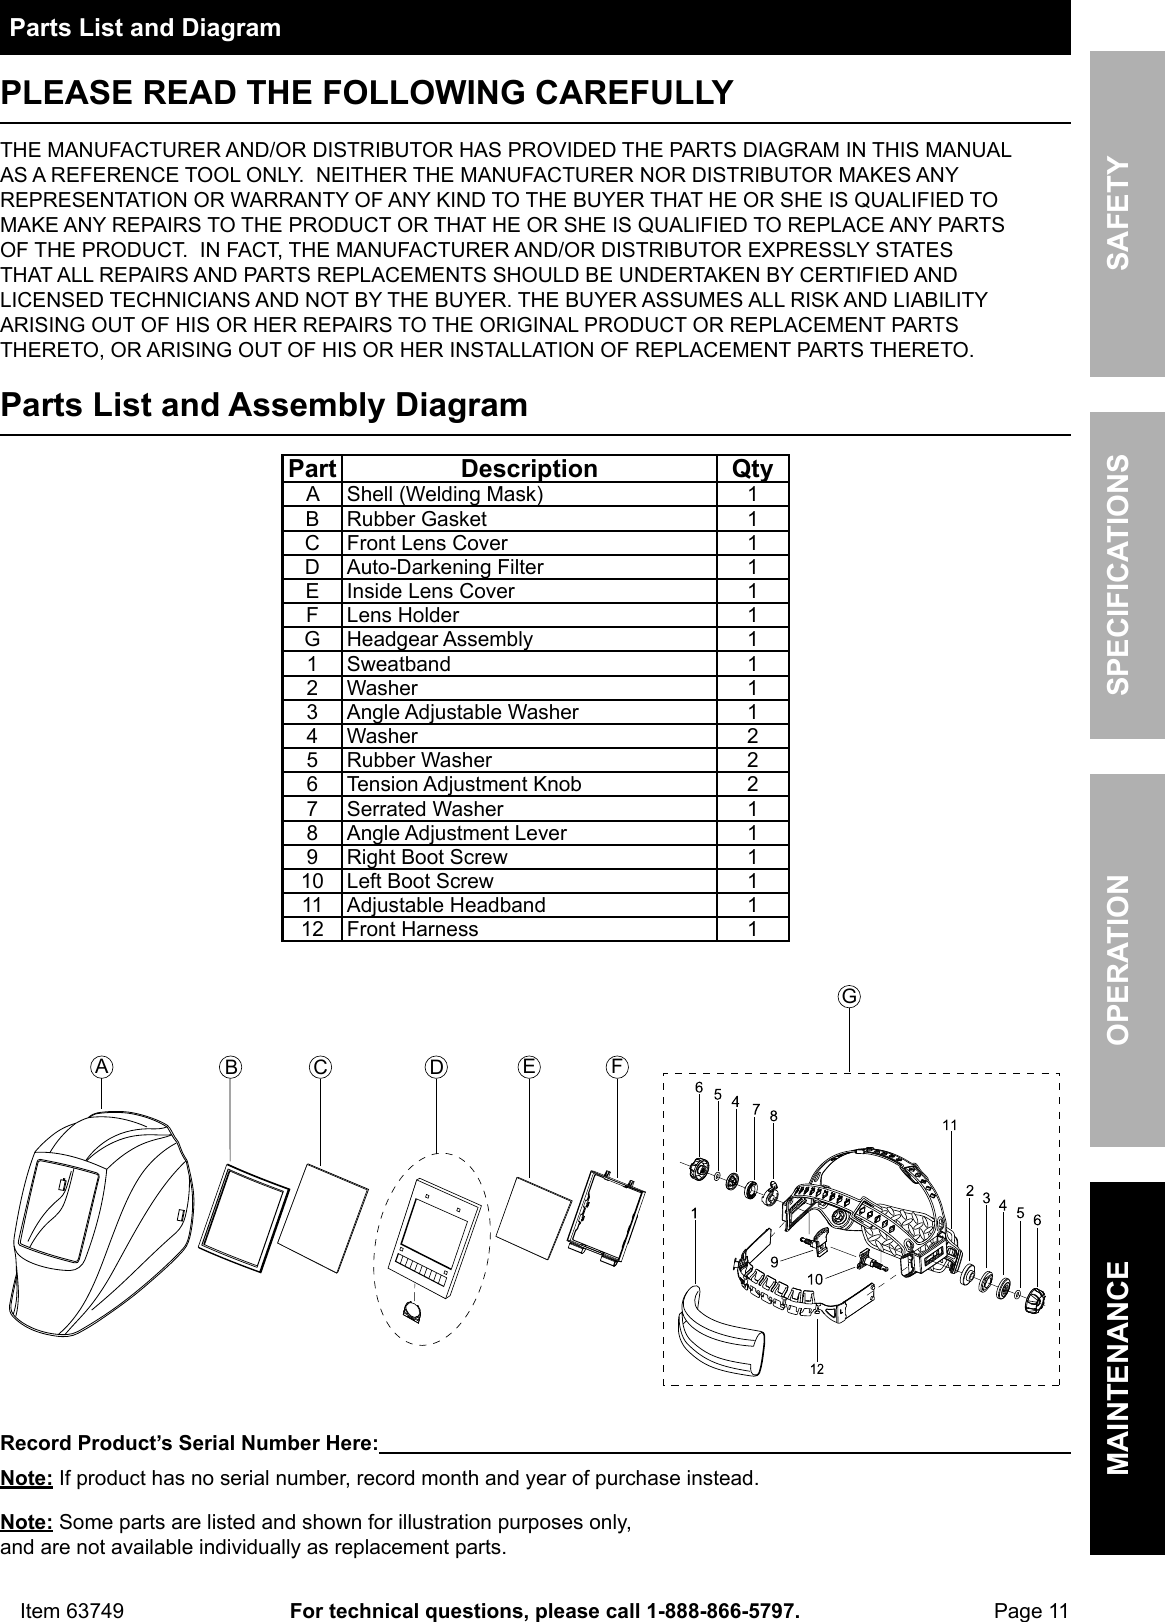 Page 11 of 12 - Manual For The 63749 Arc Safe™ Auto Darkening Welding Helmet